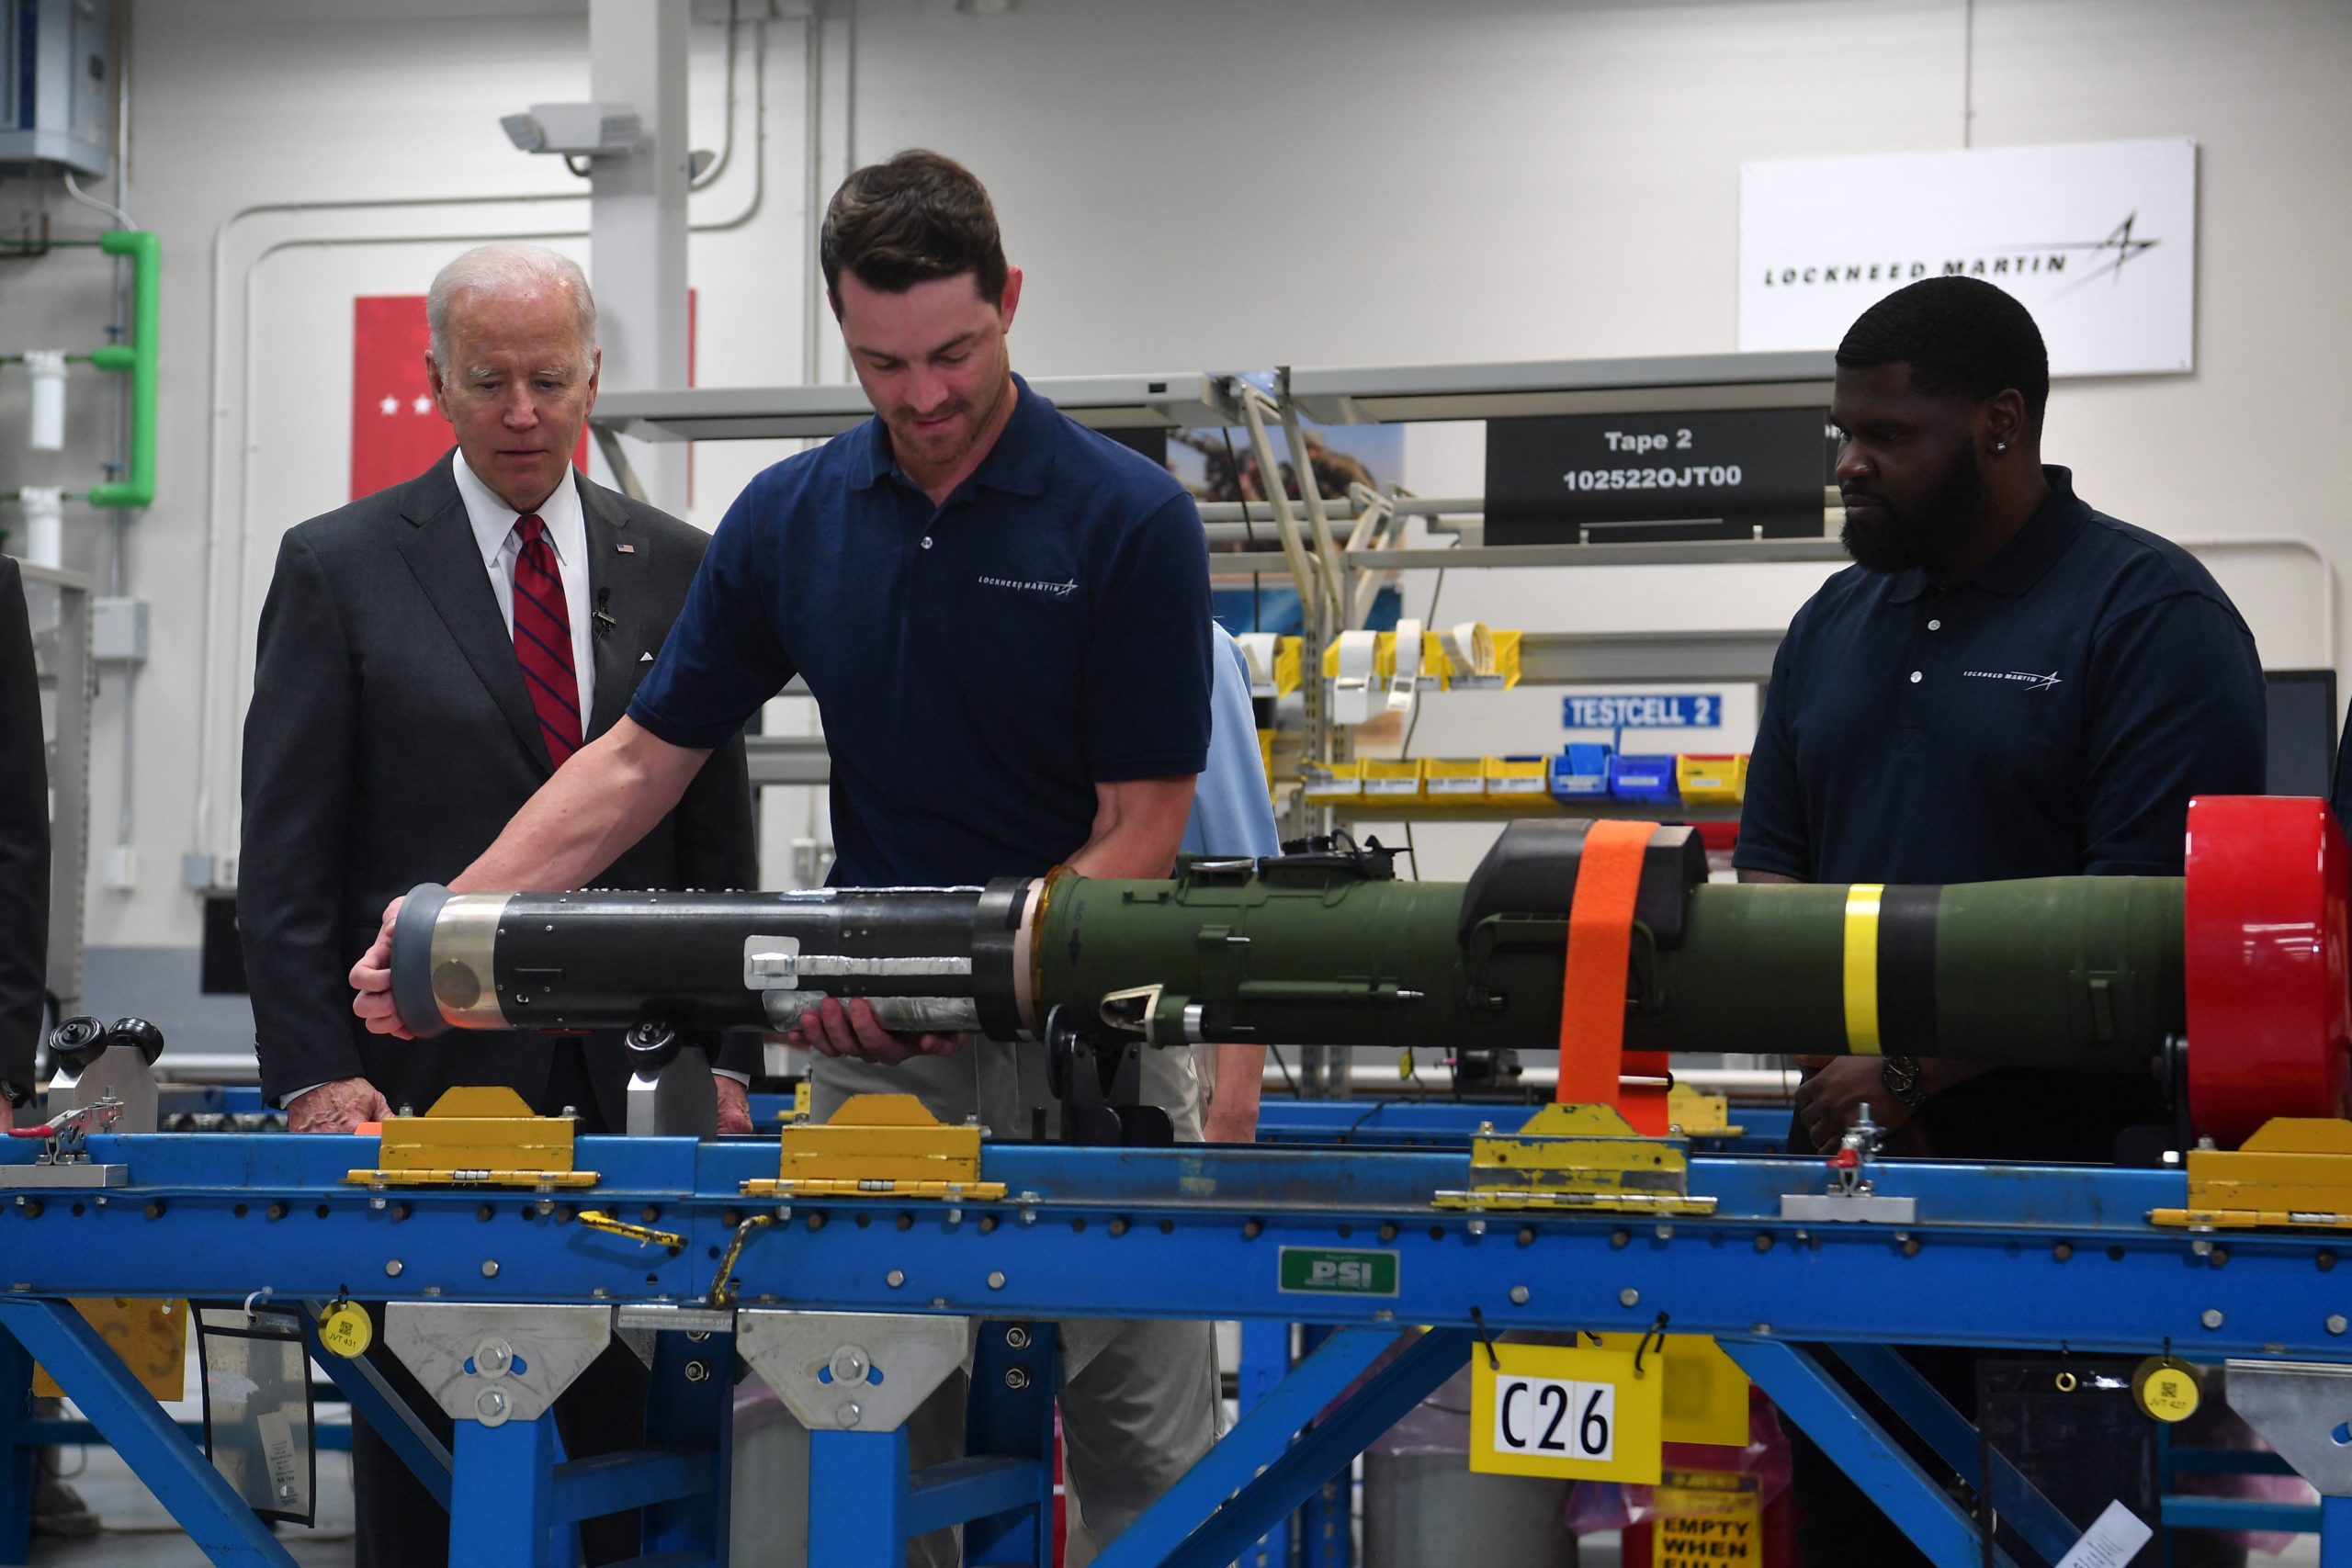 US President Joe Biden watches employees as he tours the Lockheed Martins Pike County Operations facility in Troy, Alabama, on May 3, 2022. - Biden is traveling to Troy, Alabama, to visit a Lockheed Martin Martin facility which manufactures weapon systems. 